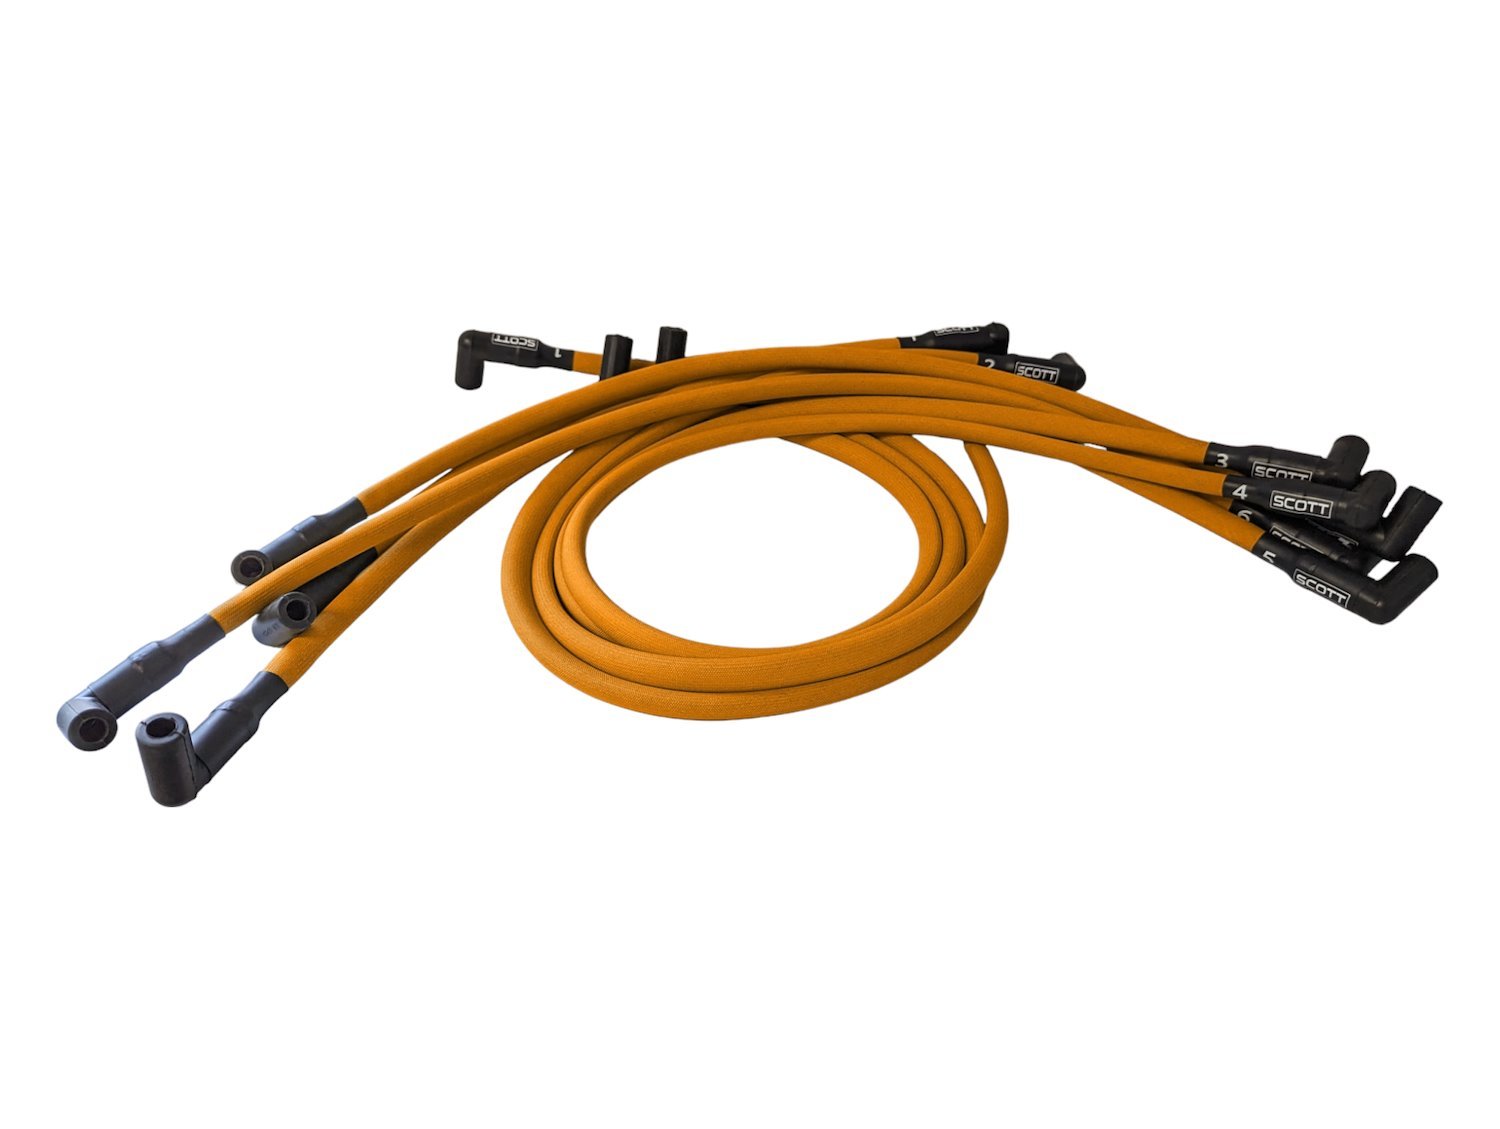 SPW300-PS-402-6 Super Mag Fiberglass-Oversleeved Spark Plug Wire Set for Small Block Chevy, Over Valve Cover [Orange]